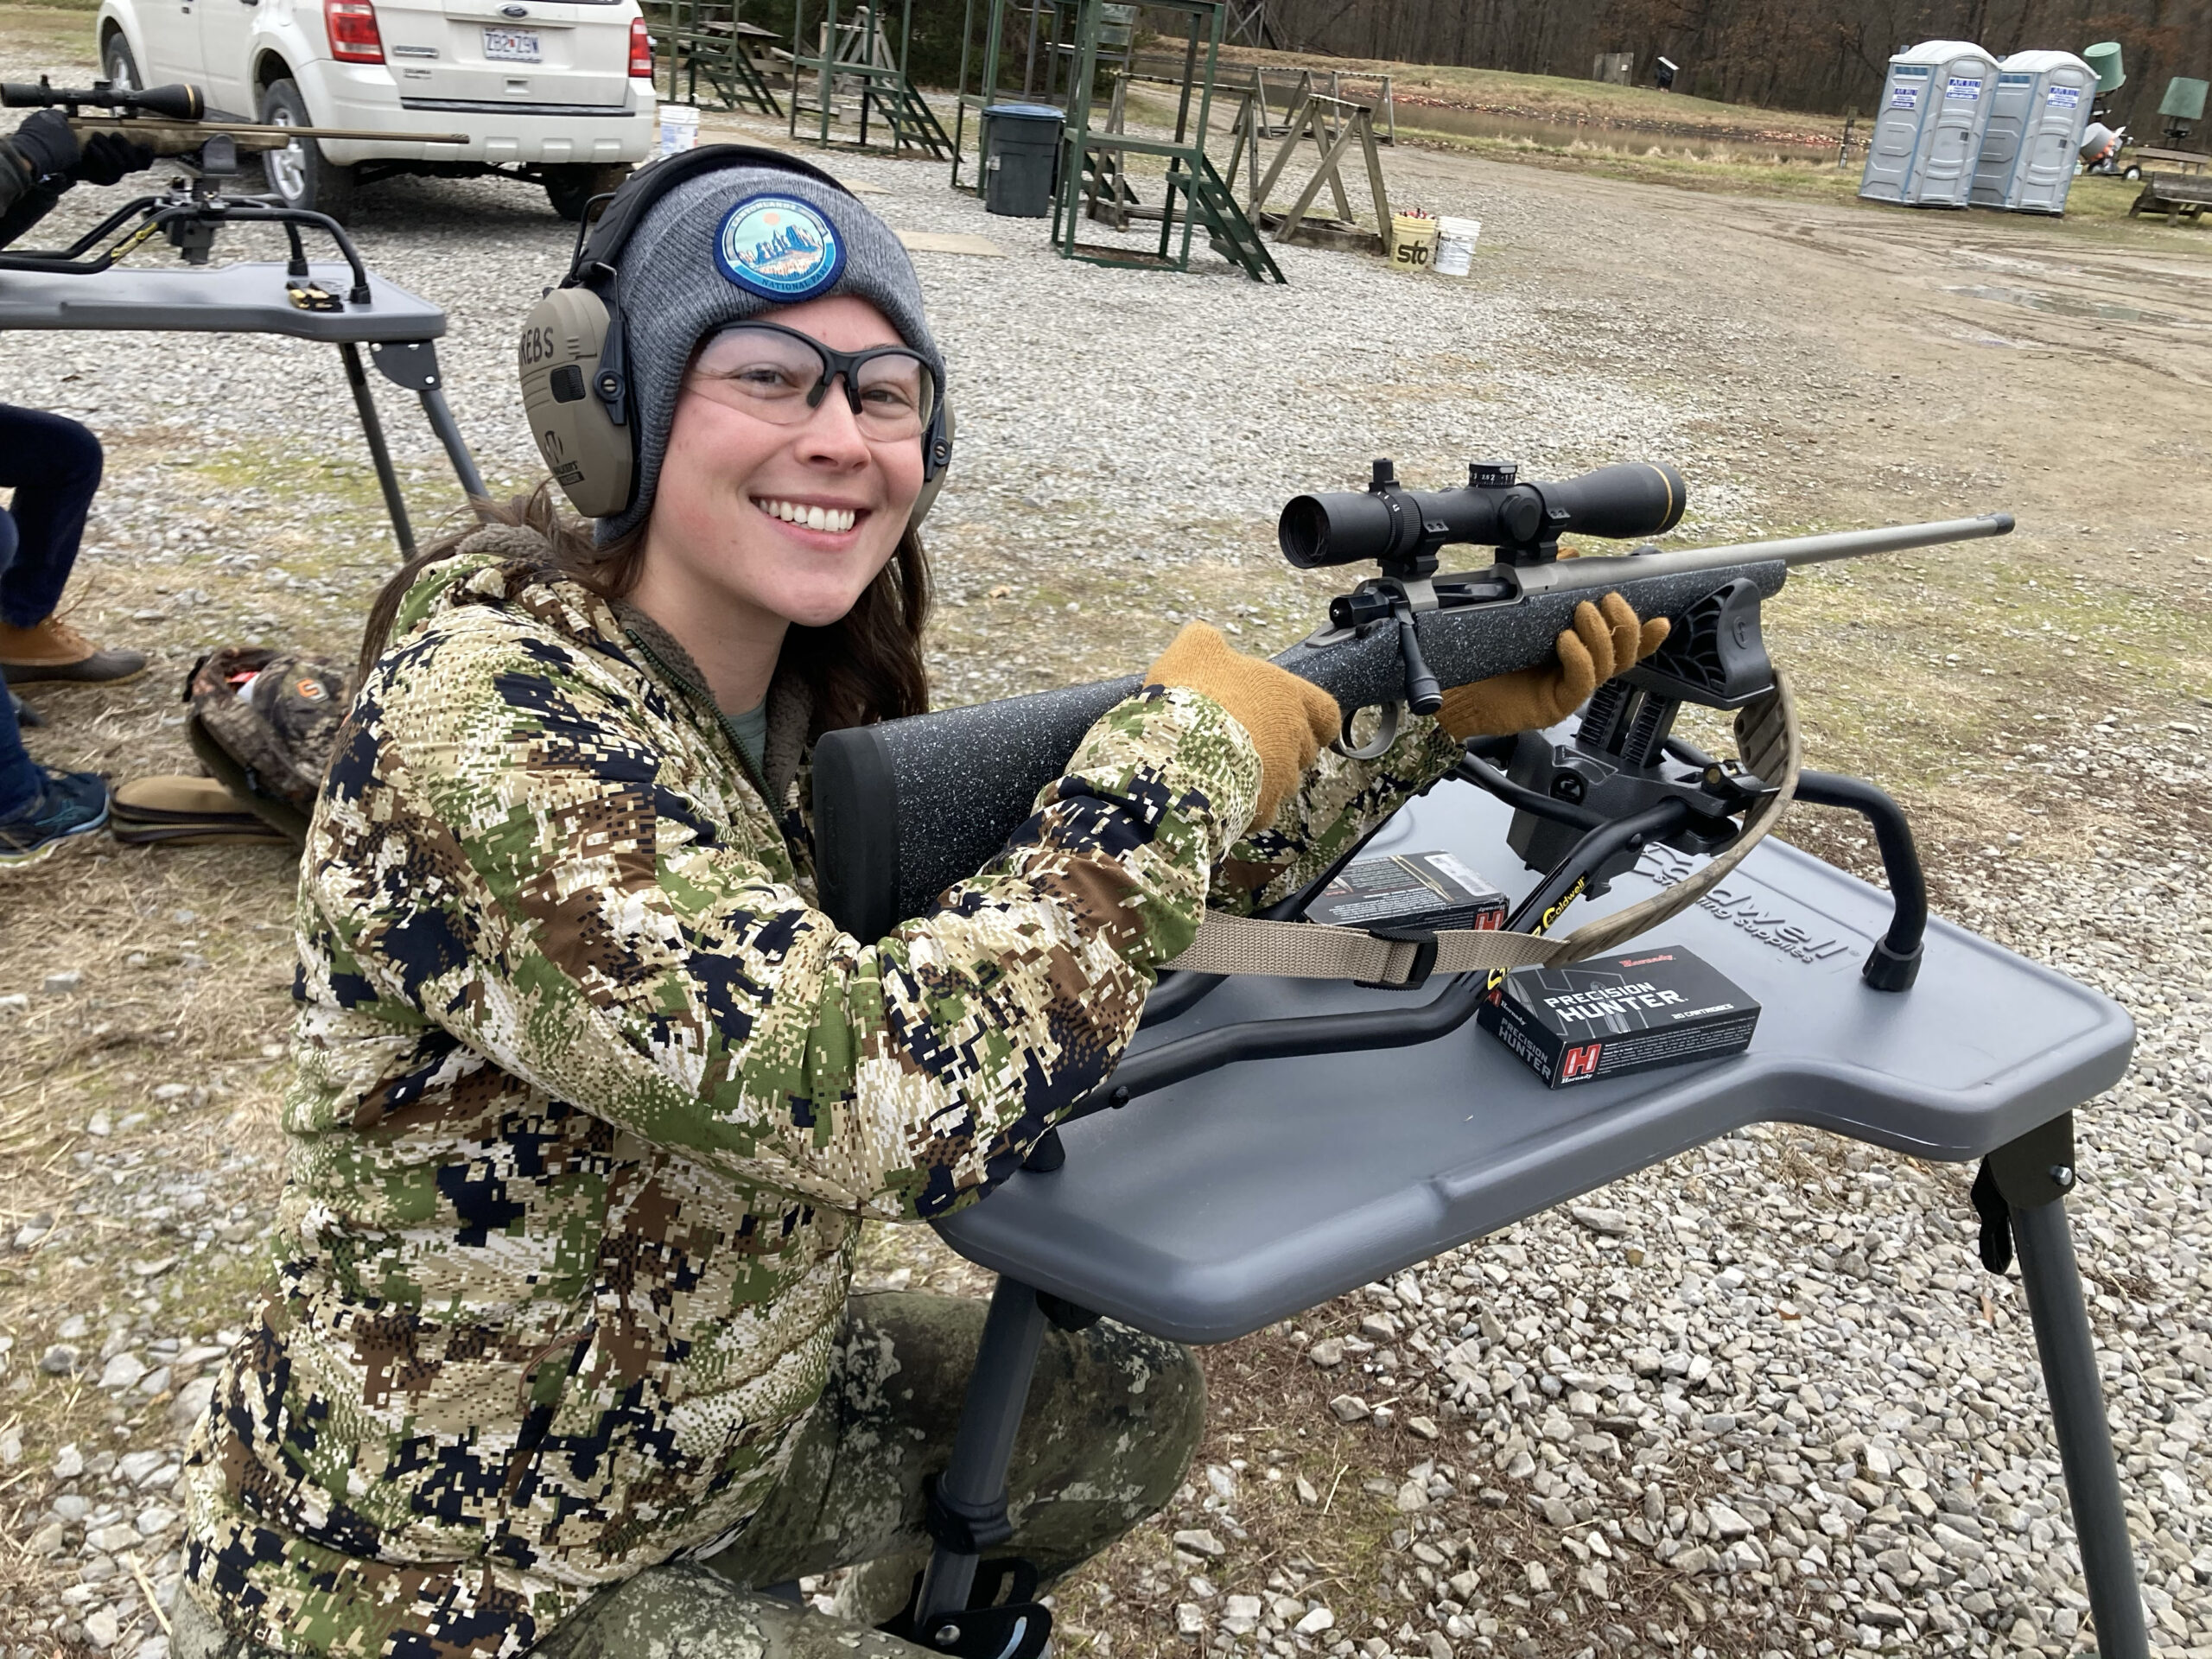 Author sights in her borrowed rifle at the range.